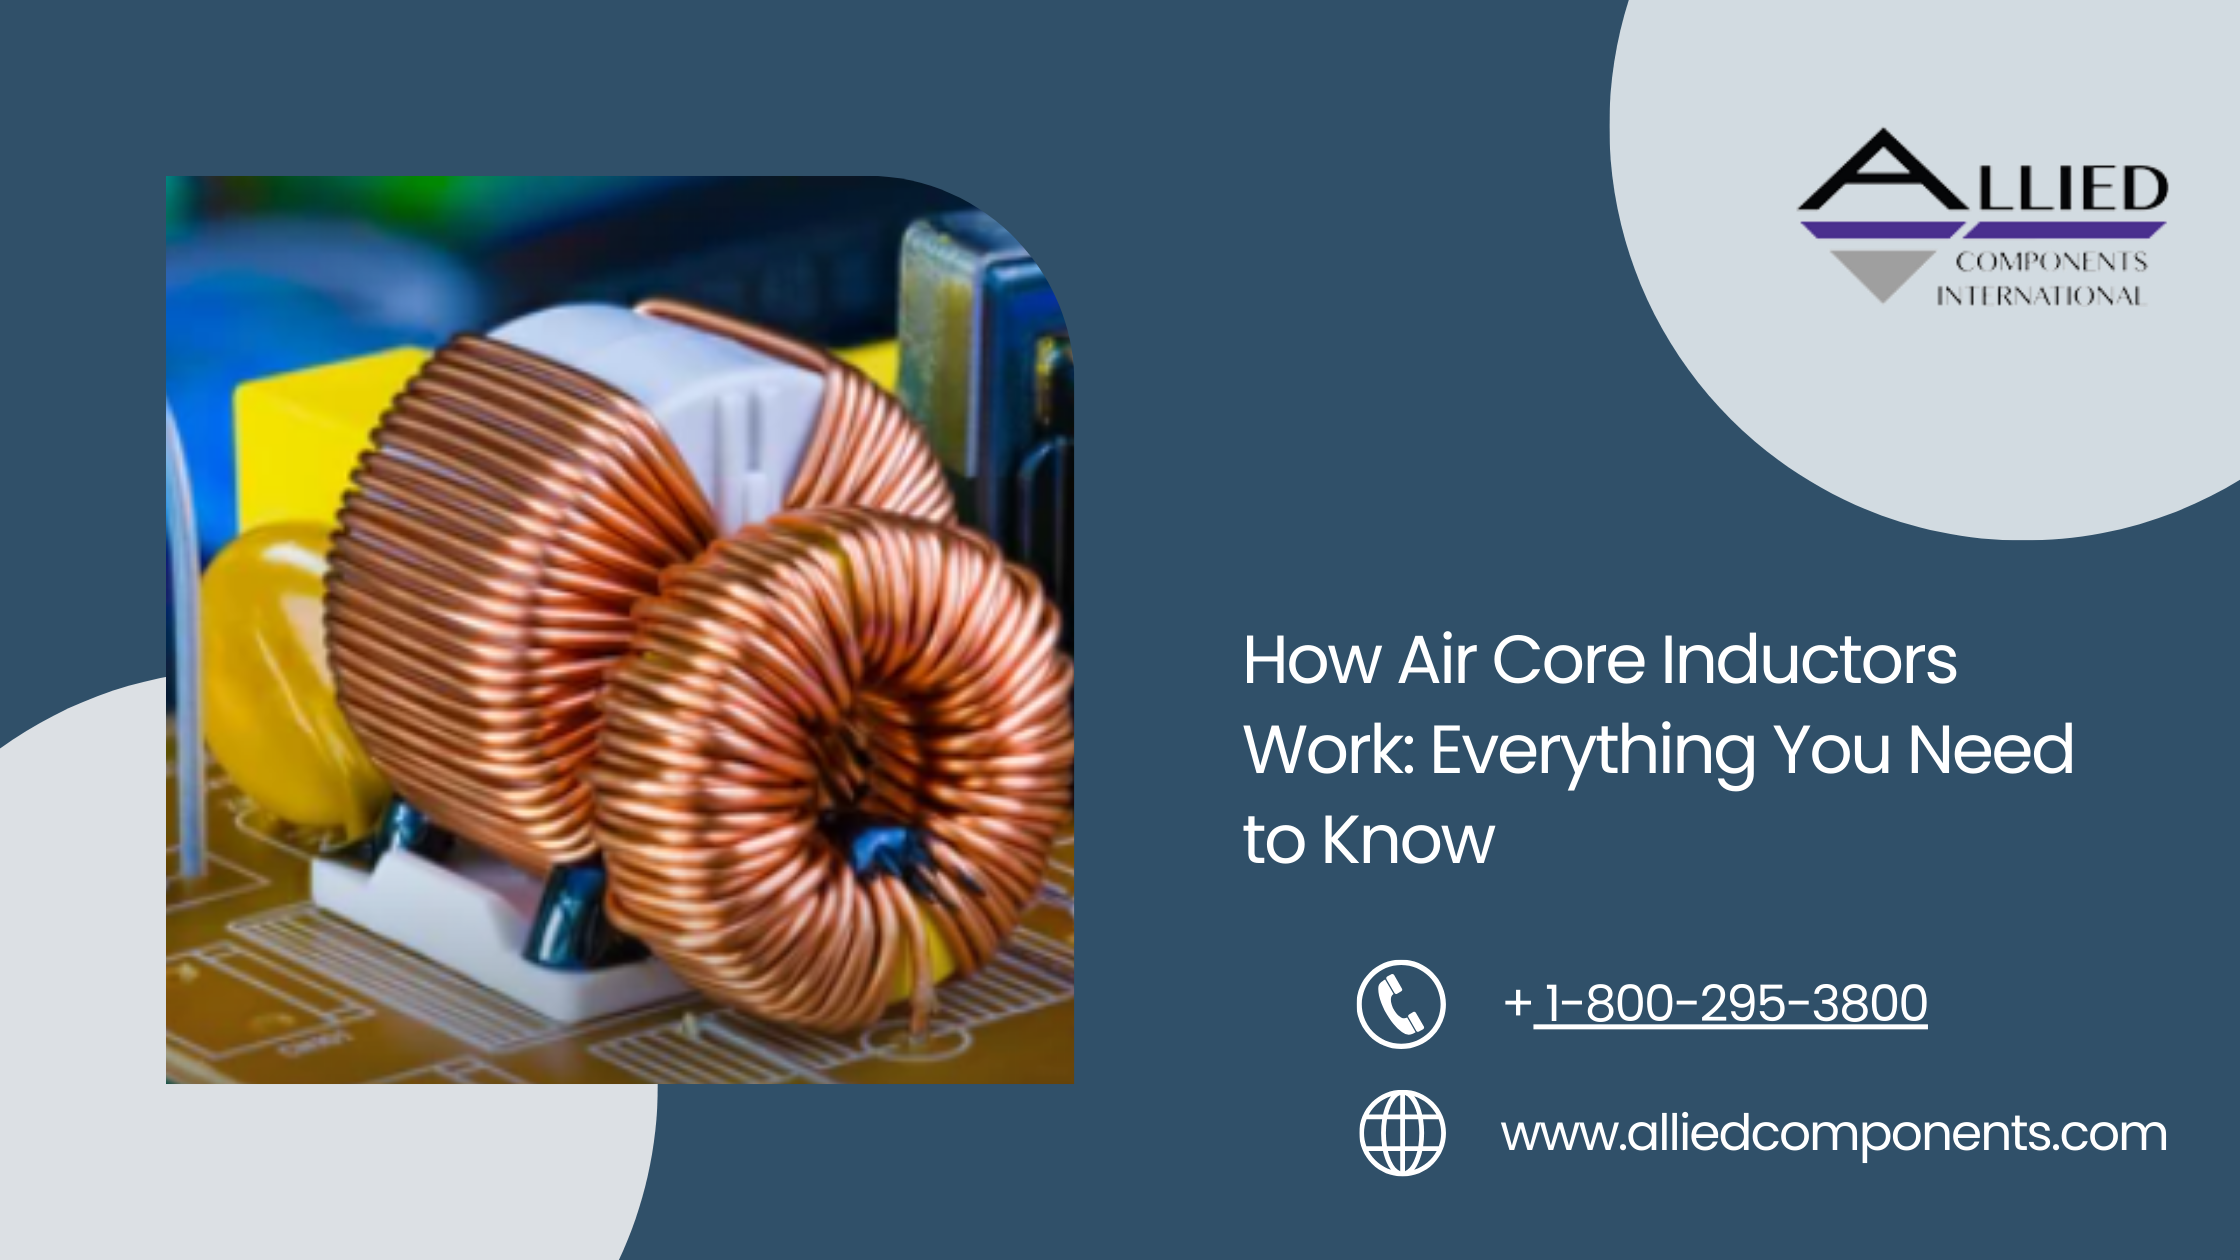 How Air Core Inductors Work: Everything You Need to Know